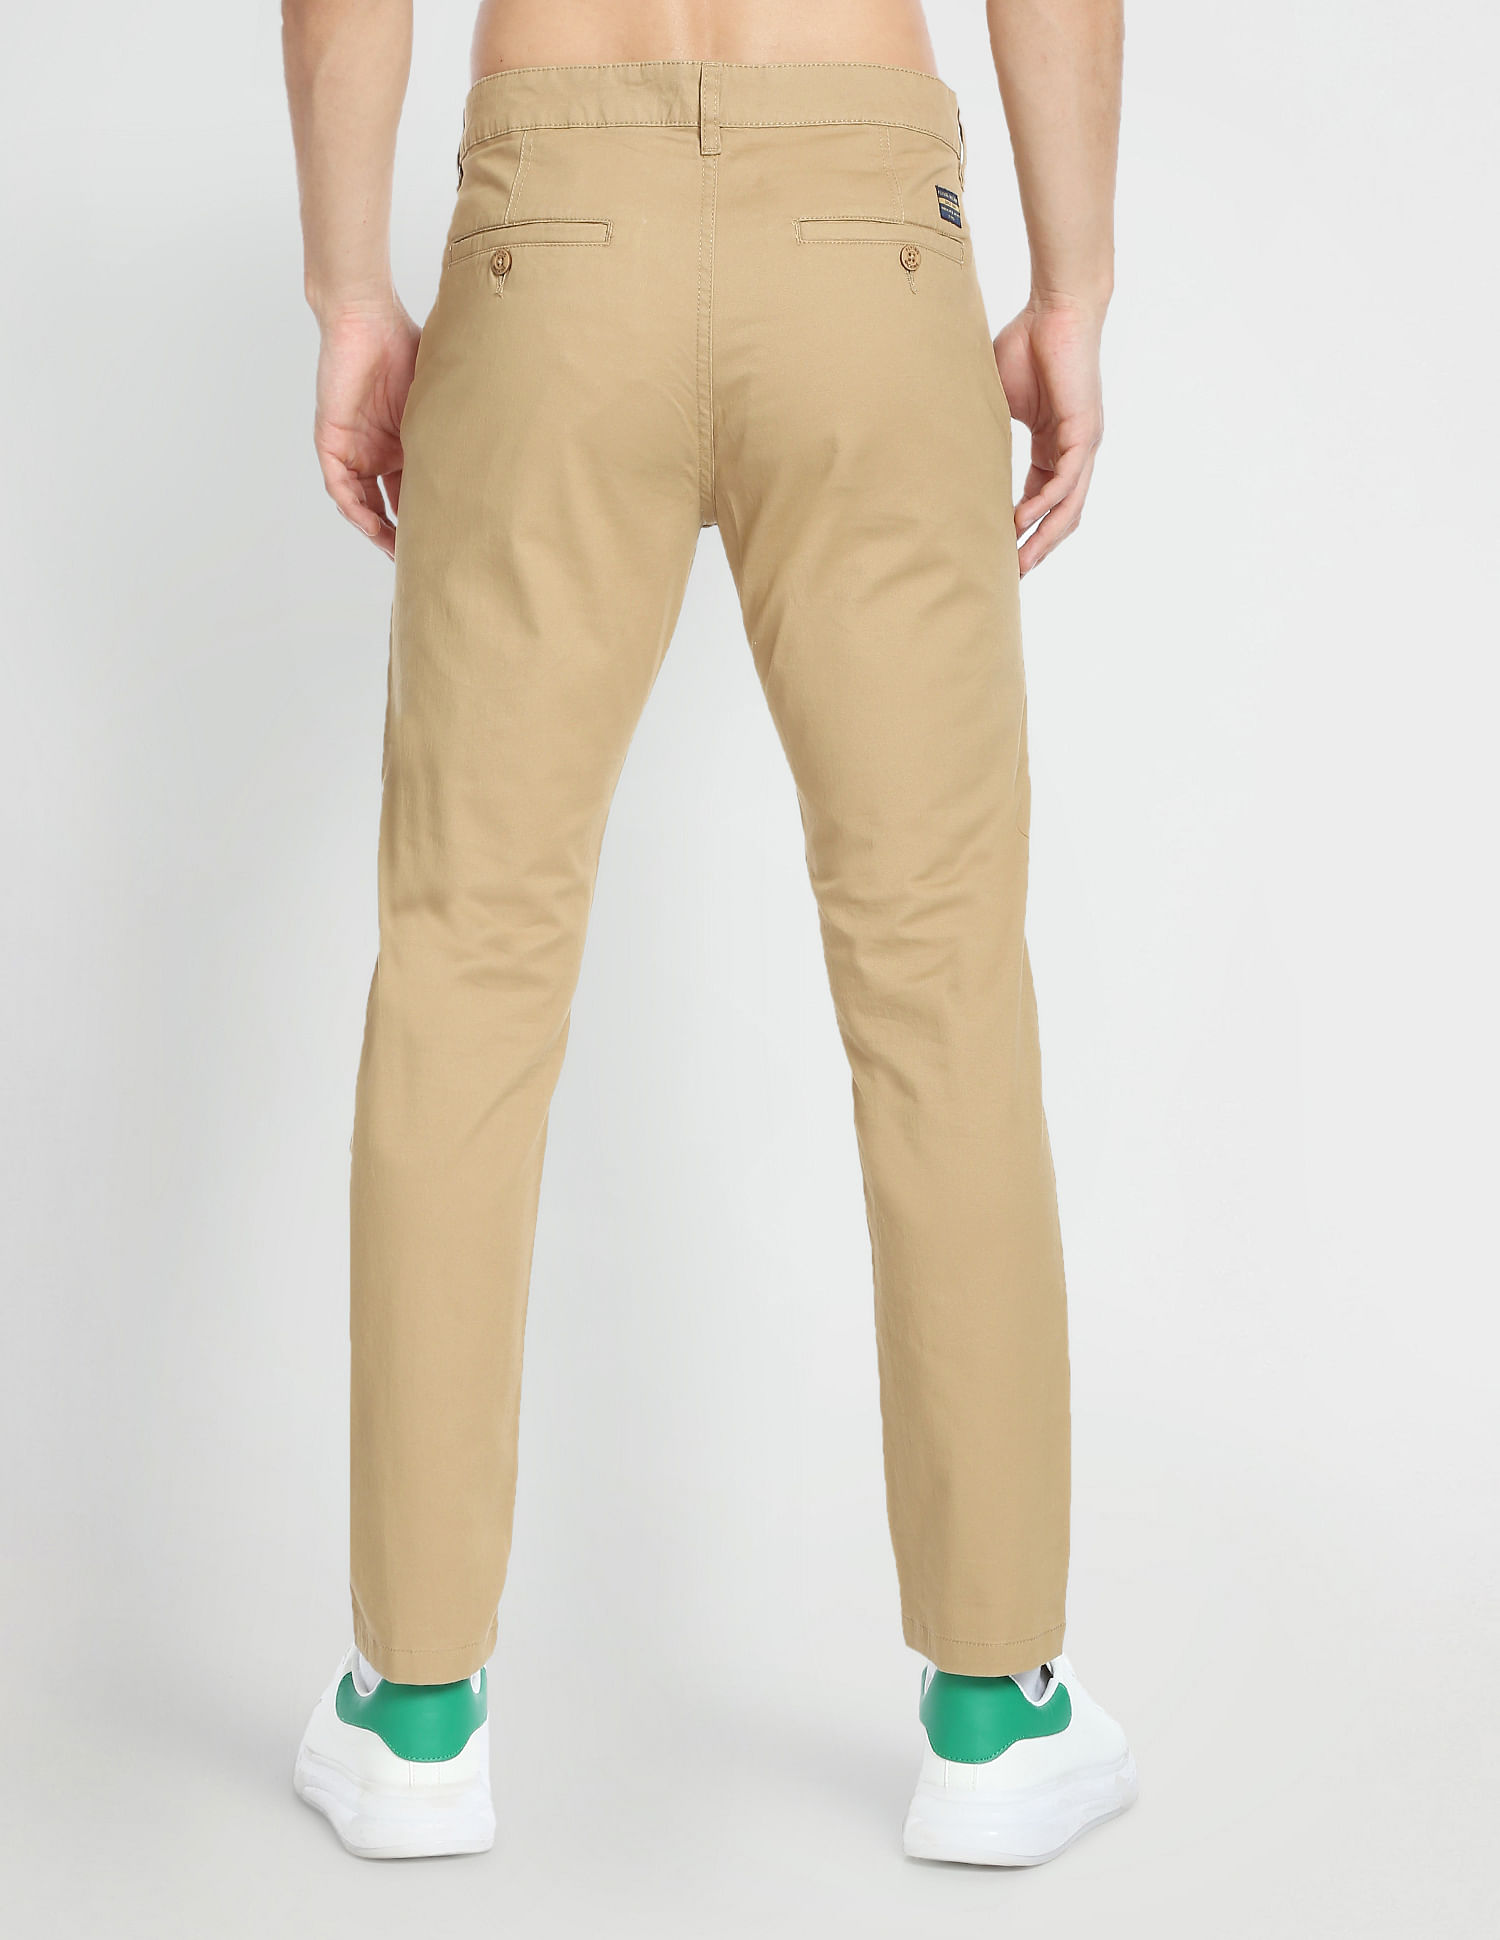 The Only Twill Pants Style Guide Youll Ever Need 2023